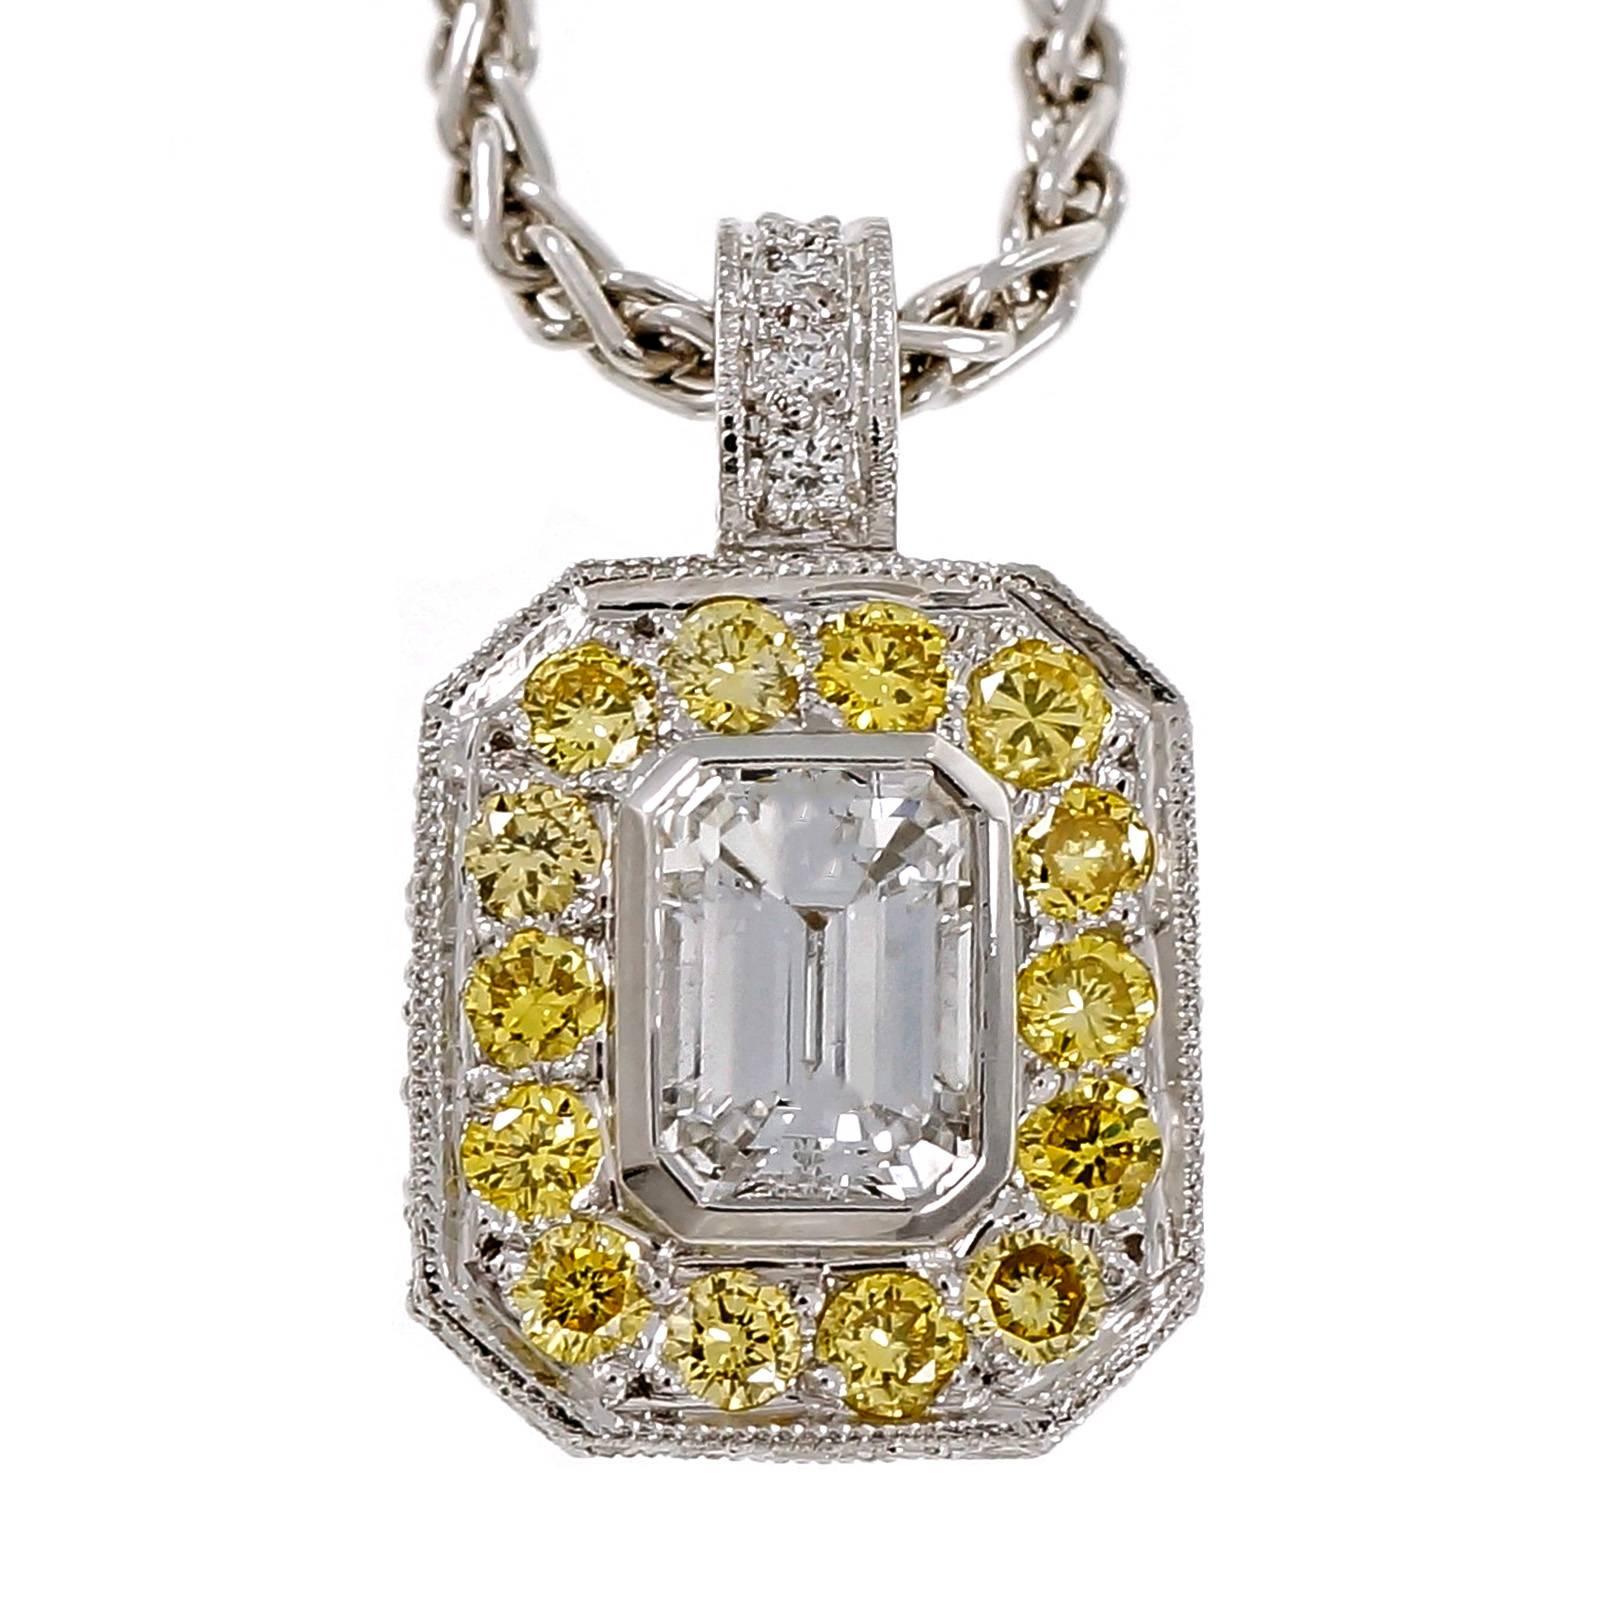 Peter Suchy Platinum pendant with a colorless high grade Emerald step cut diamond circa 1920 surrounded by natural fancy intense yellow diamonds in an octagonal pendant on a Platinum wheat chain.

1 Emerald cut diamond, approx. total weight